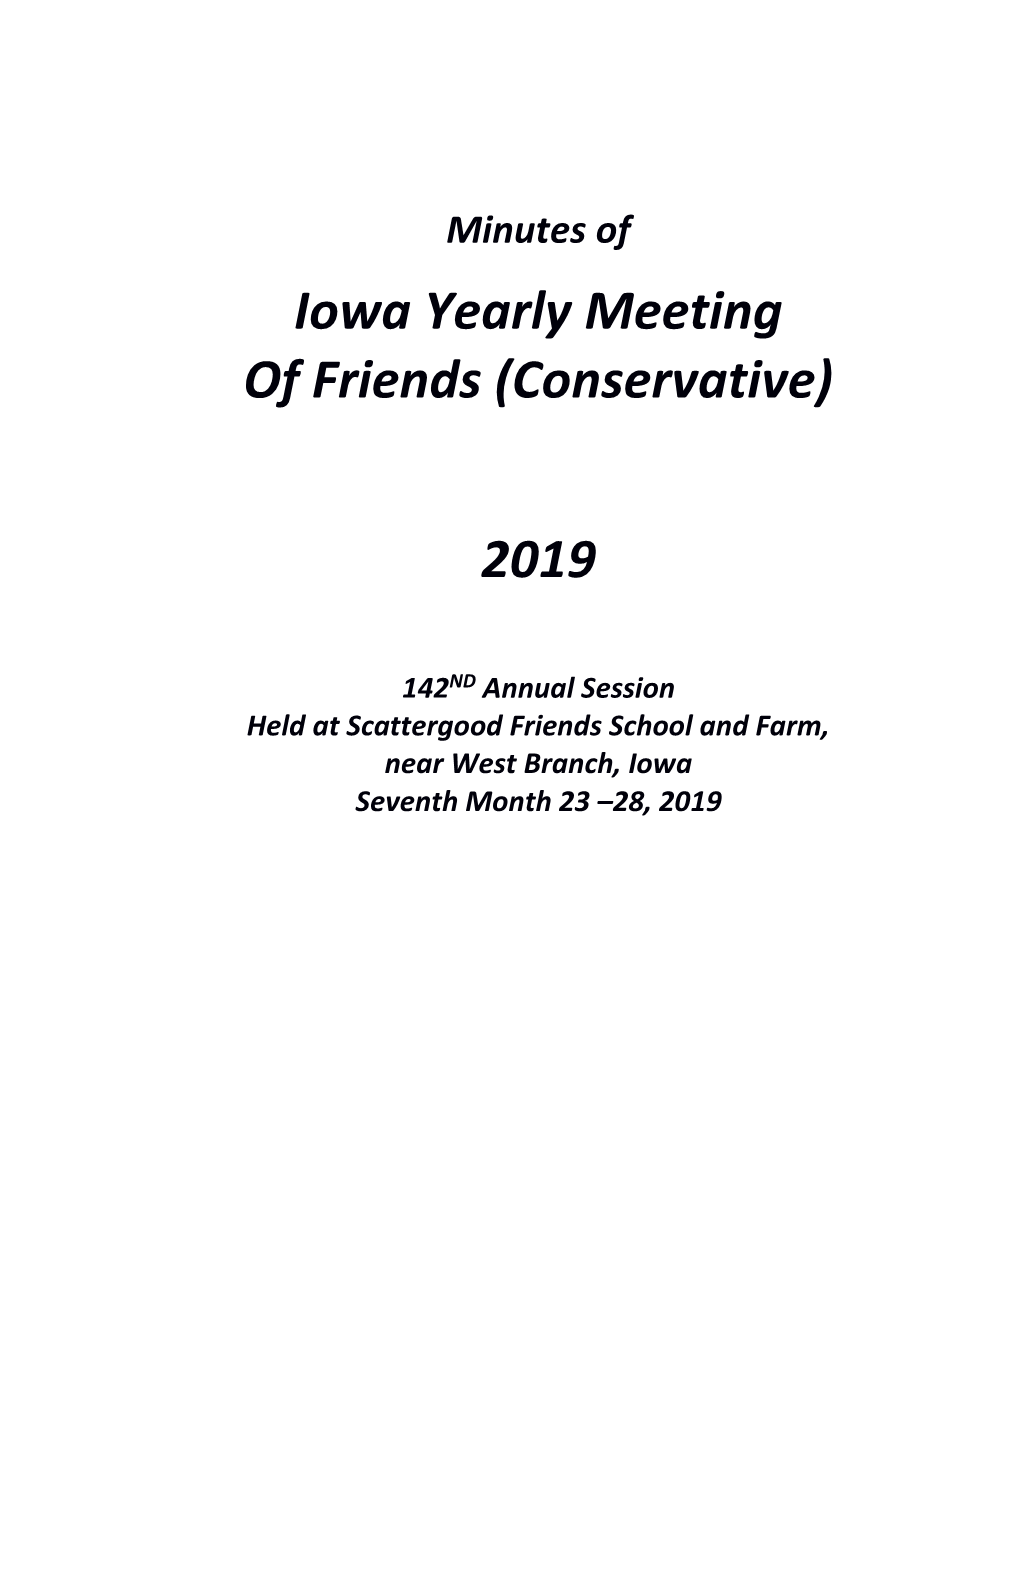 Minutes of Iowa Yearly Meeting of Friends (Conservative)